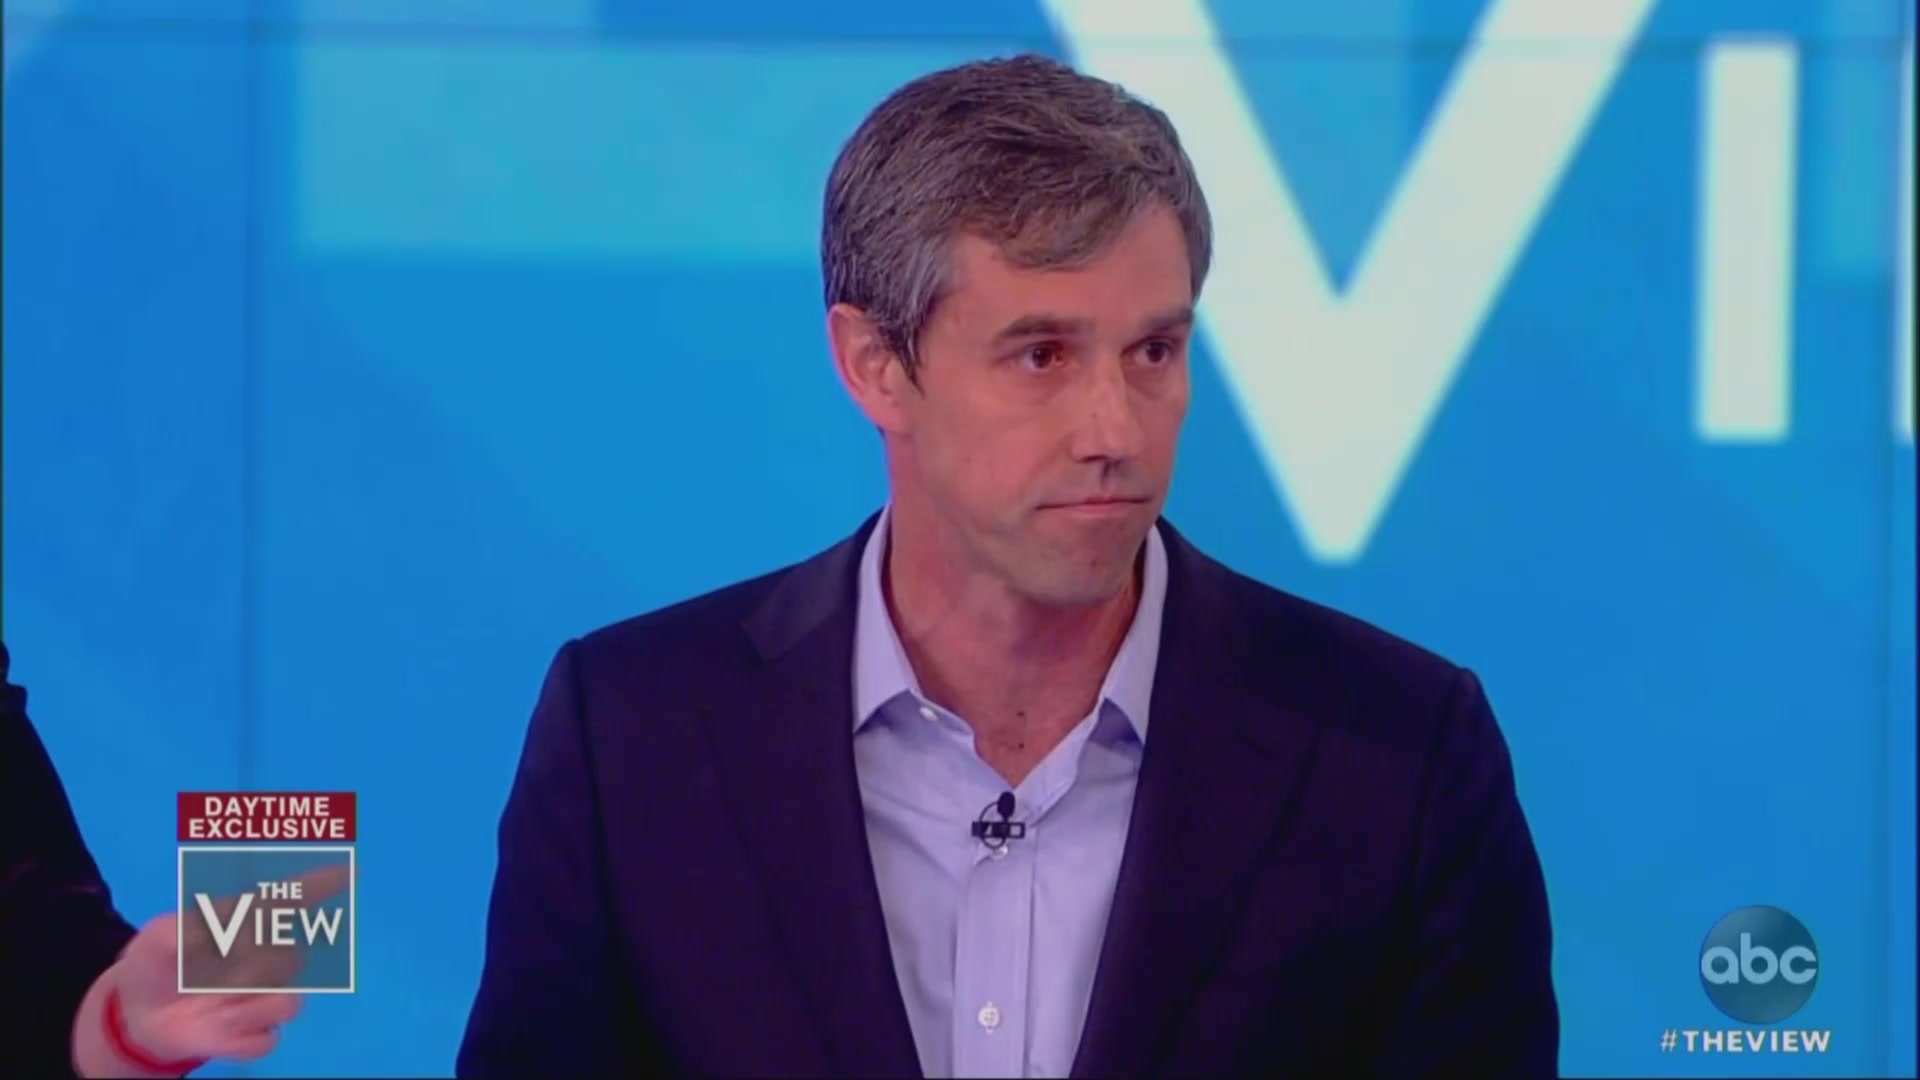 Beto O’Rourke Tells ‘The View’ That His Vanity Fair Cover Was a ‘Mistake’ and ‘Elitist’